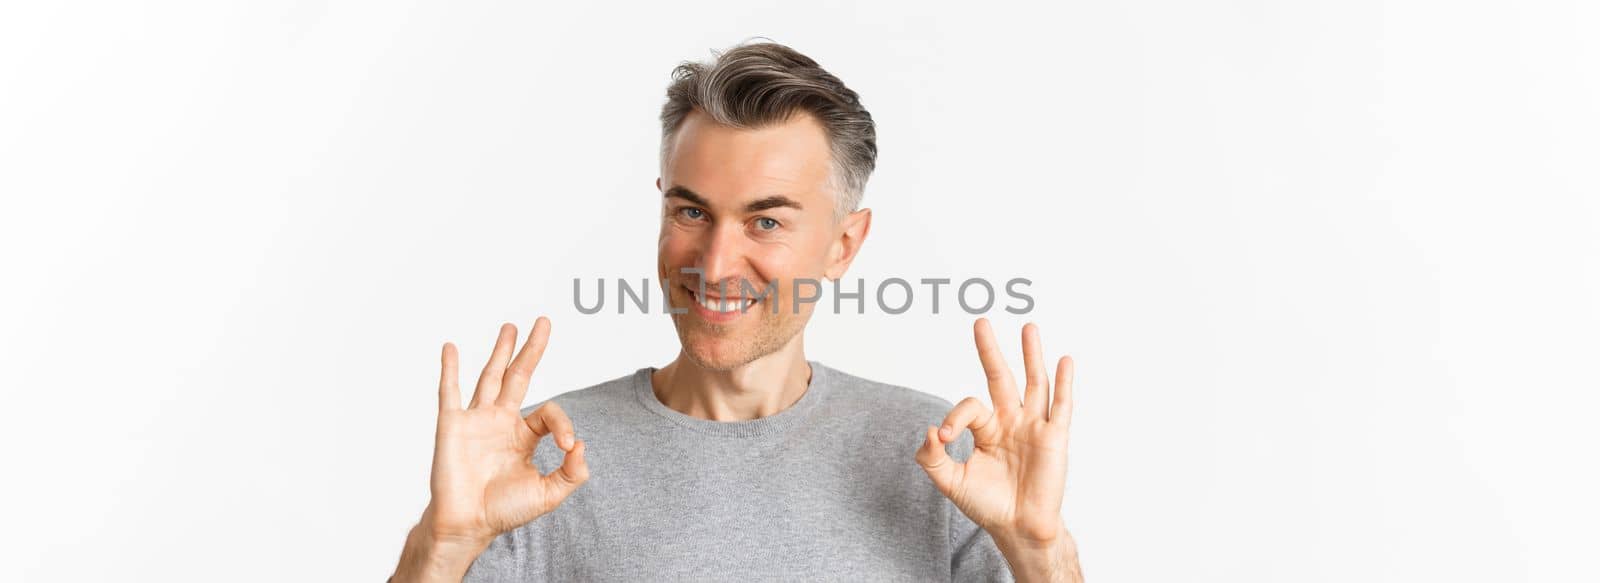 Close-up of handsome middle-aged man, smiling and showing okay signs, approve something or recommending, standing over white background.